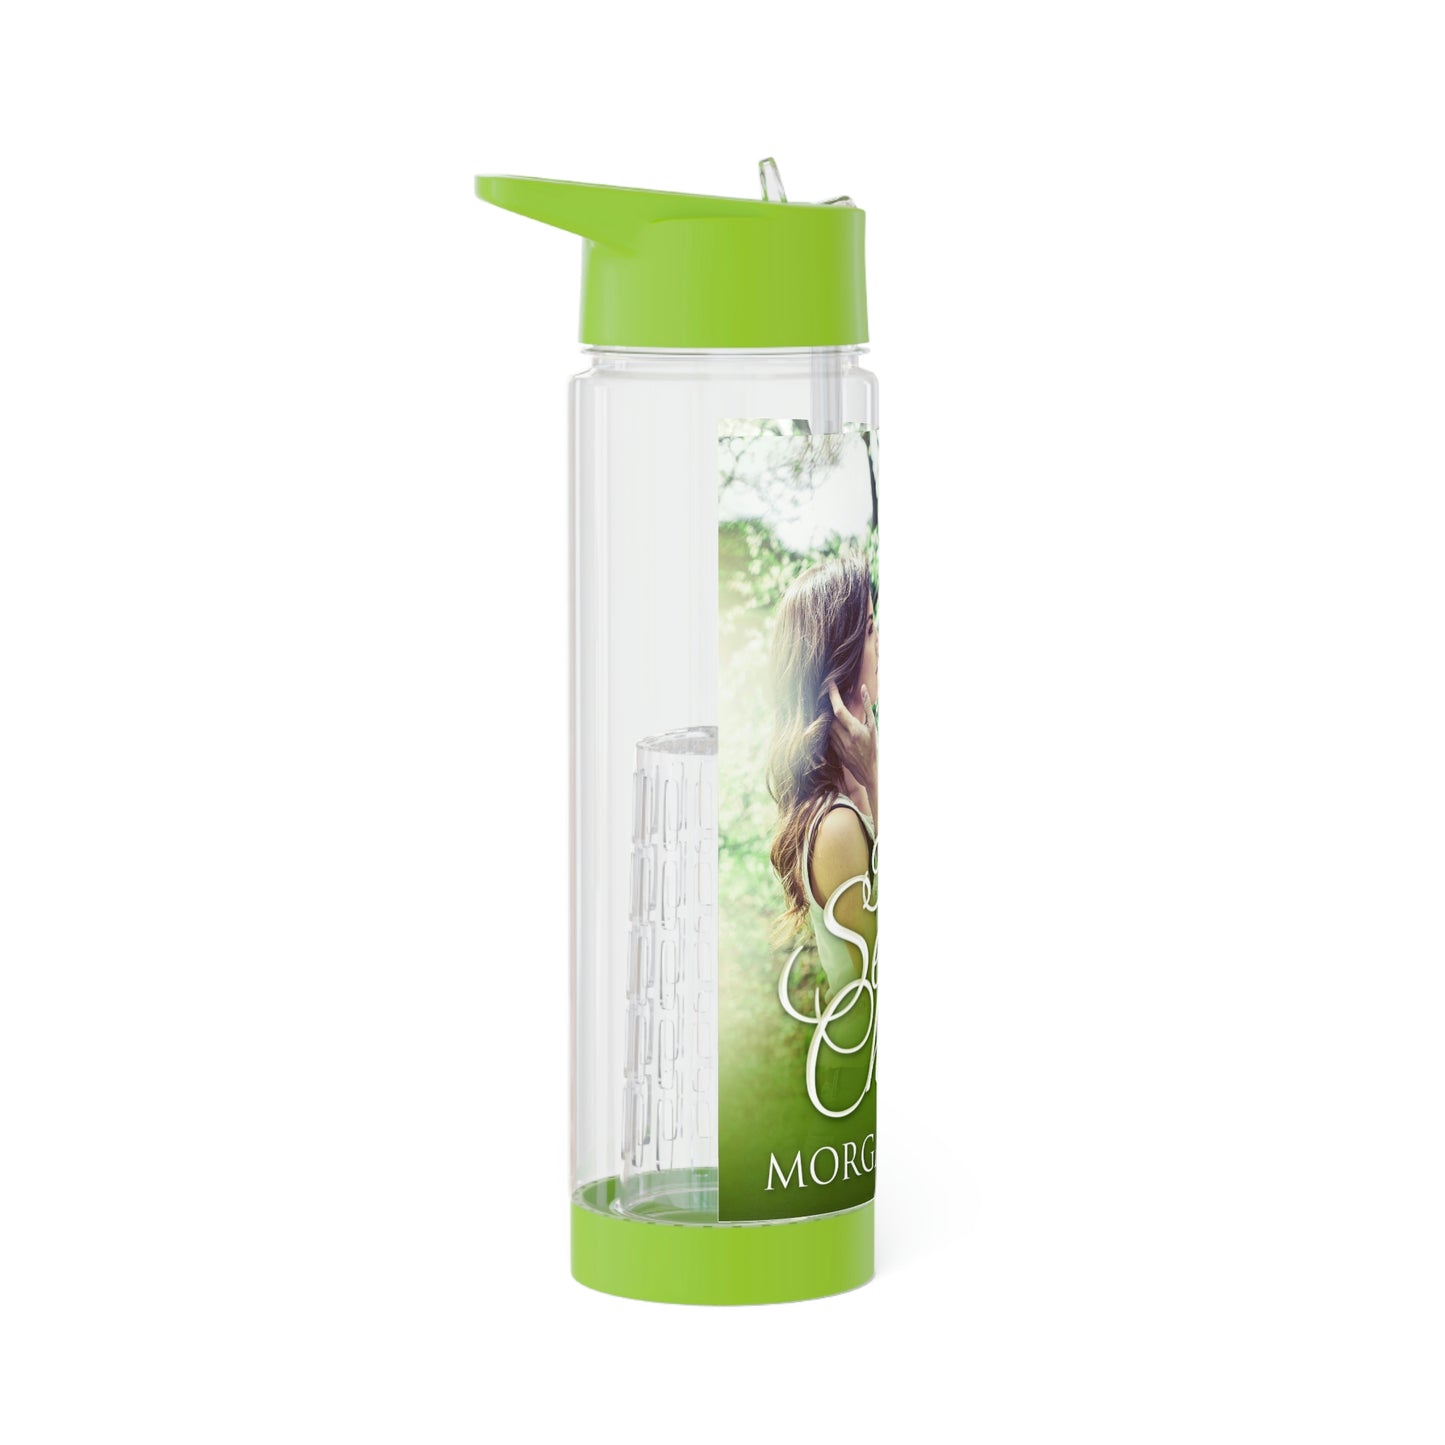 The Second Chance - Infuser Water Bottle